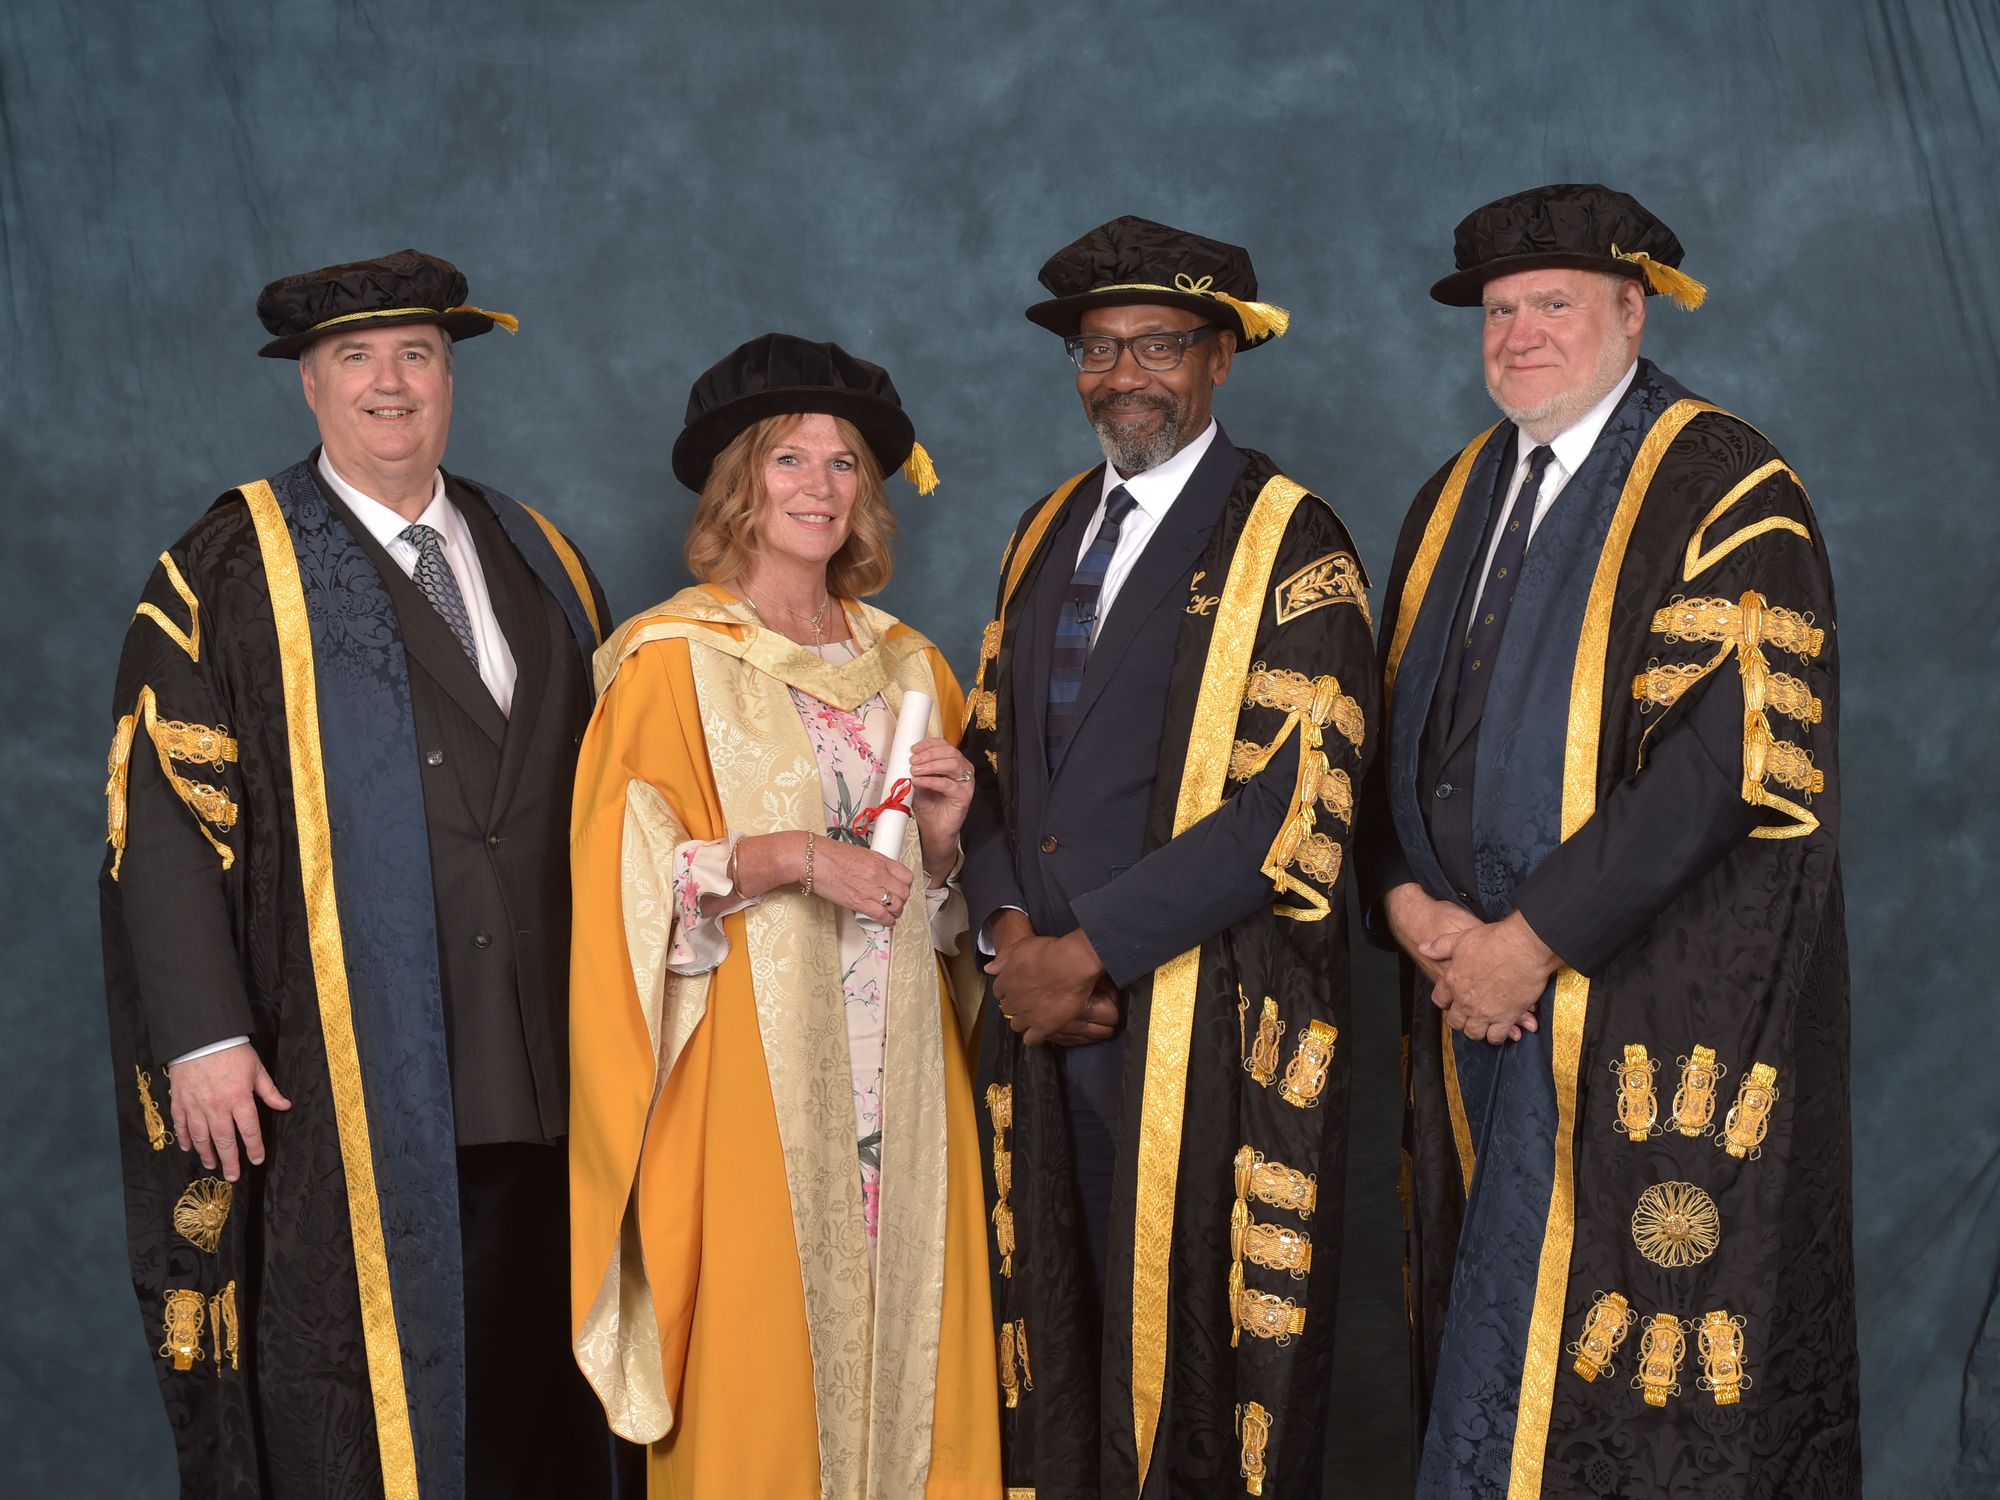 Central England Co-op Chief Executive Debbie Robinson awarded honorary doctorate